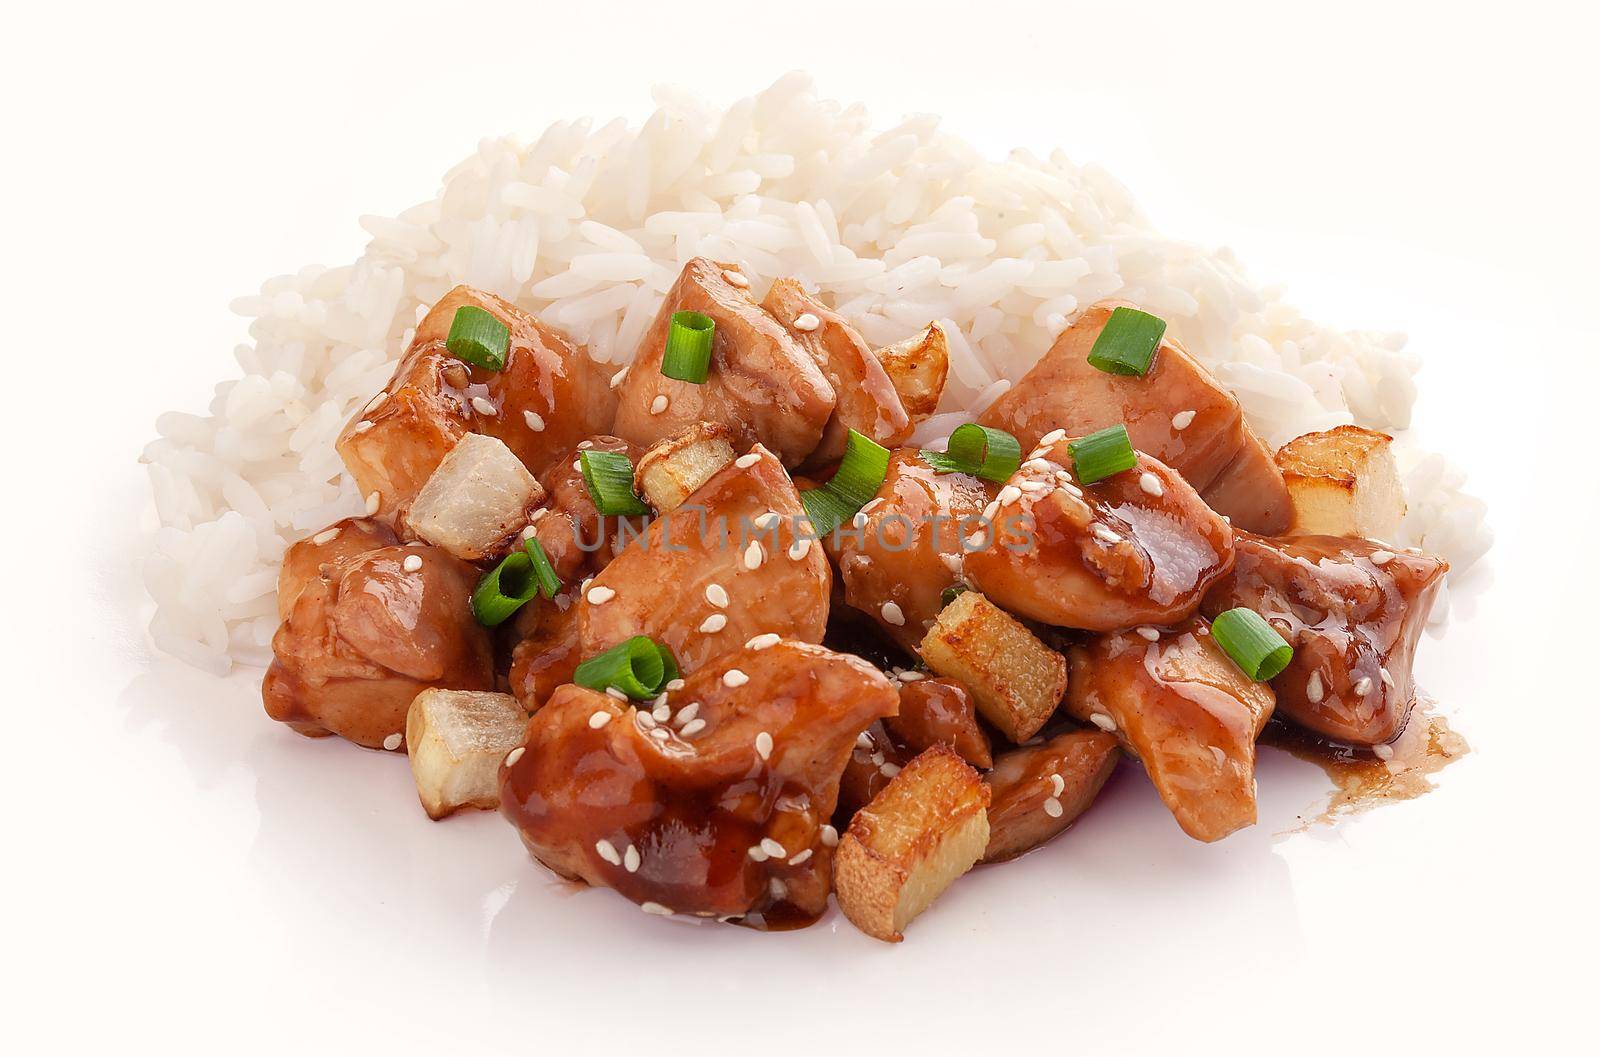 Fried chicken teriyaki with daikon, ginger, green onion and sesame on rice